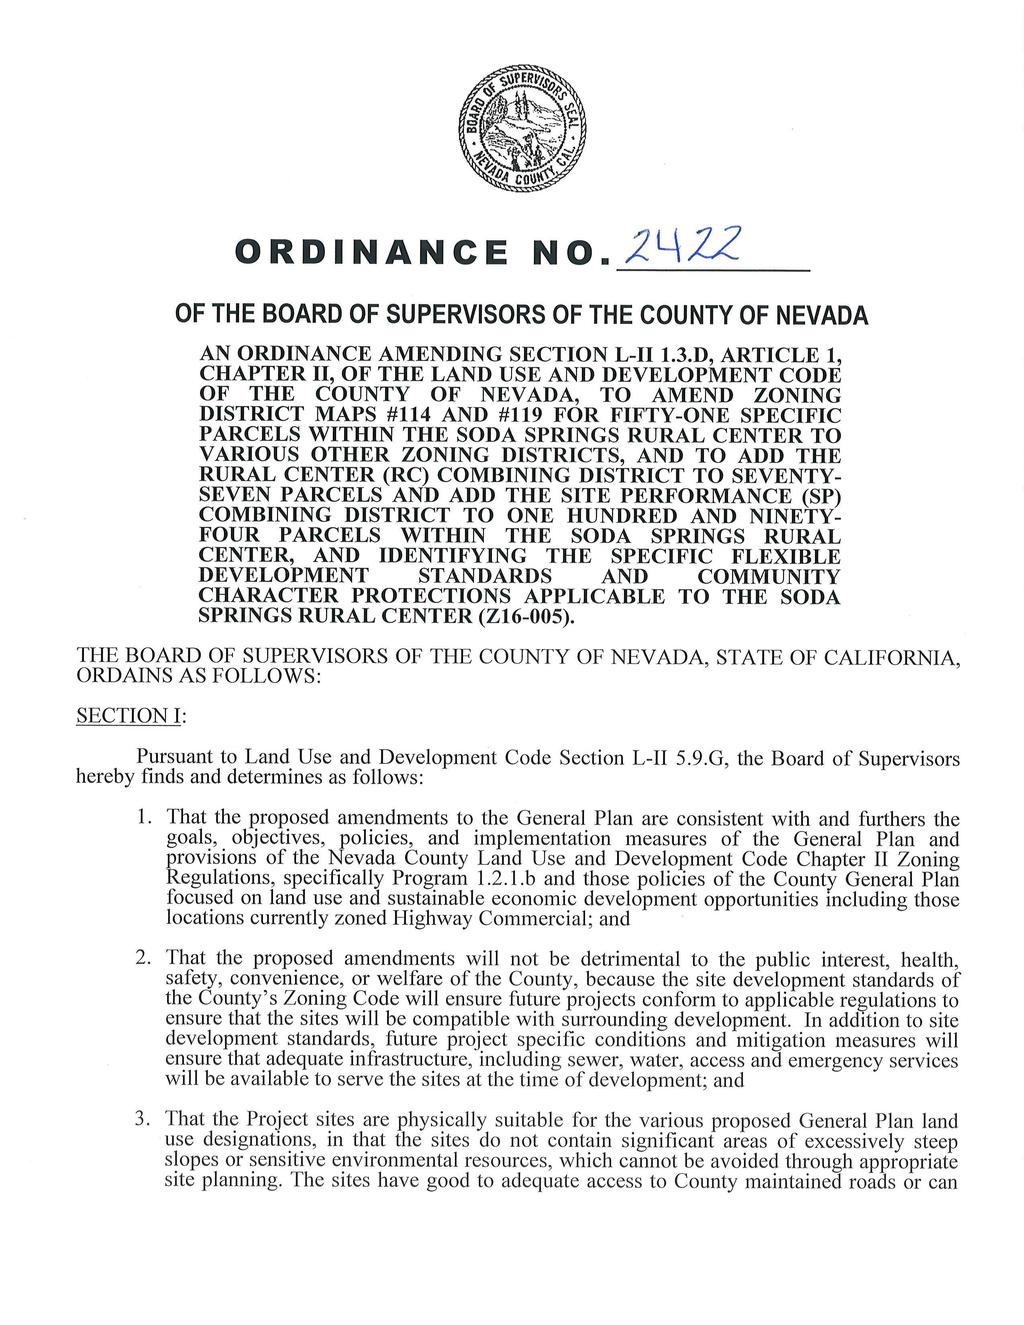 ORDINANCE NO. ~~~-~ OF THE BOARD OF SUPERVISORS OF THE COUNTY OF NEVADA AN ORDINANCE AMENDING SECTION L-II 1.3.